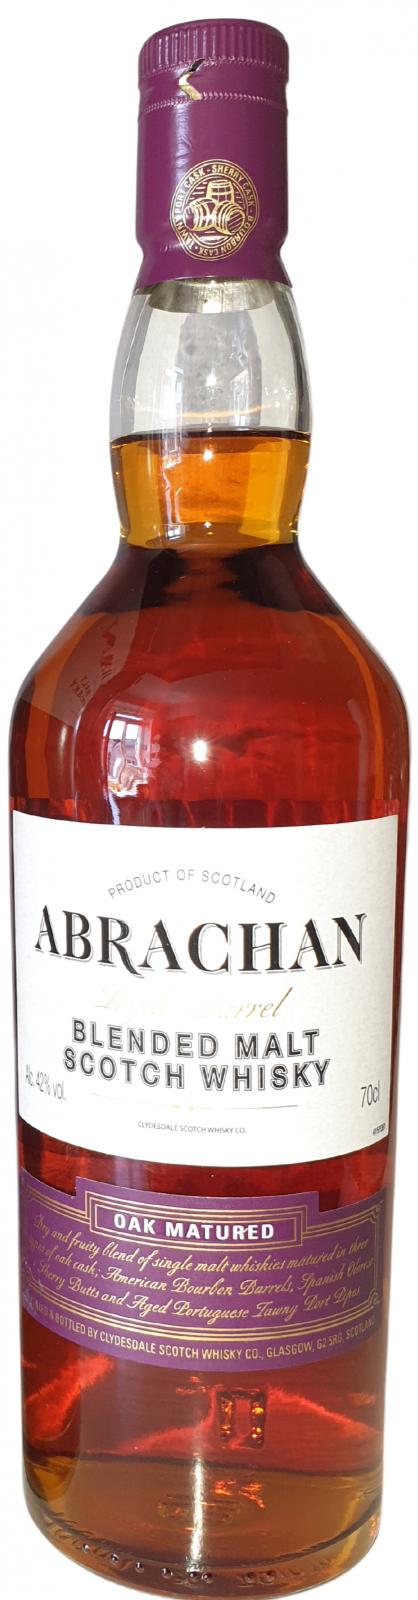 Abrachan Blended Malt Scotch Whisky Cd - Ratings and reviews - Whiskybase